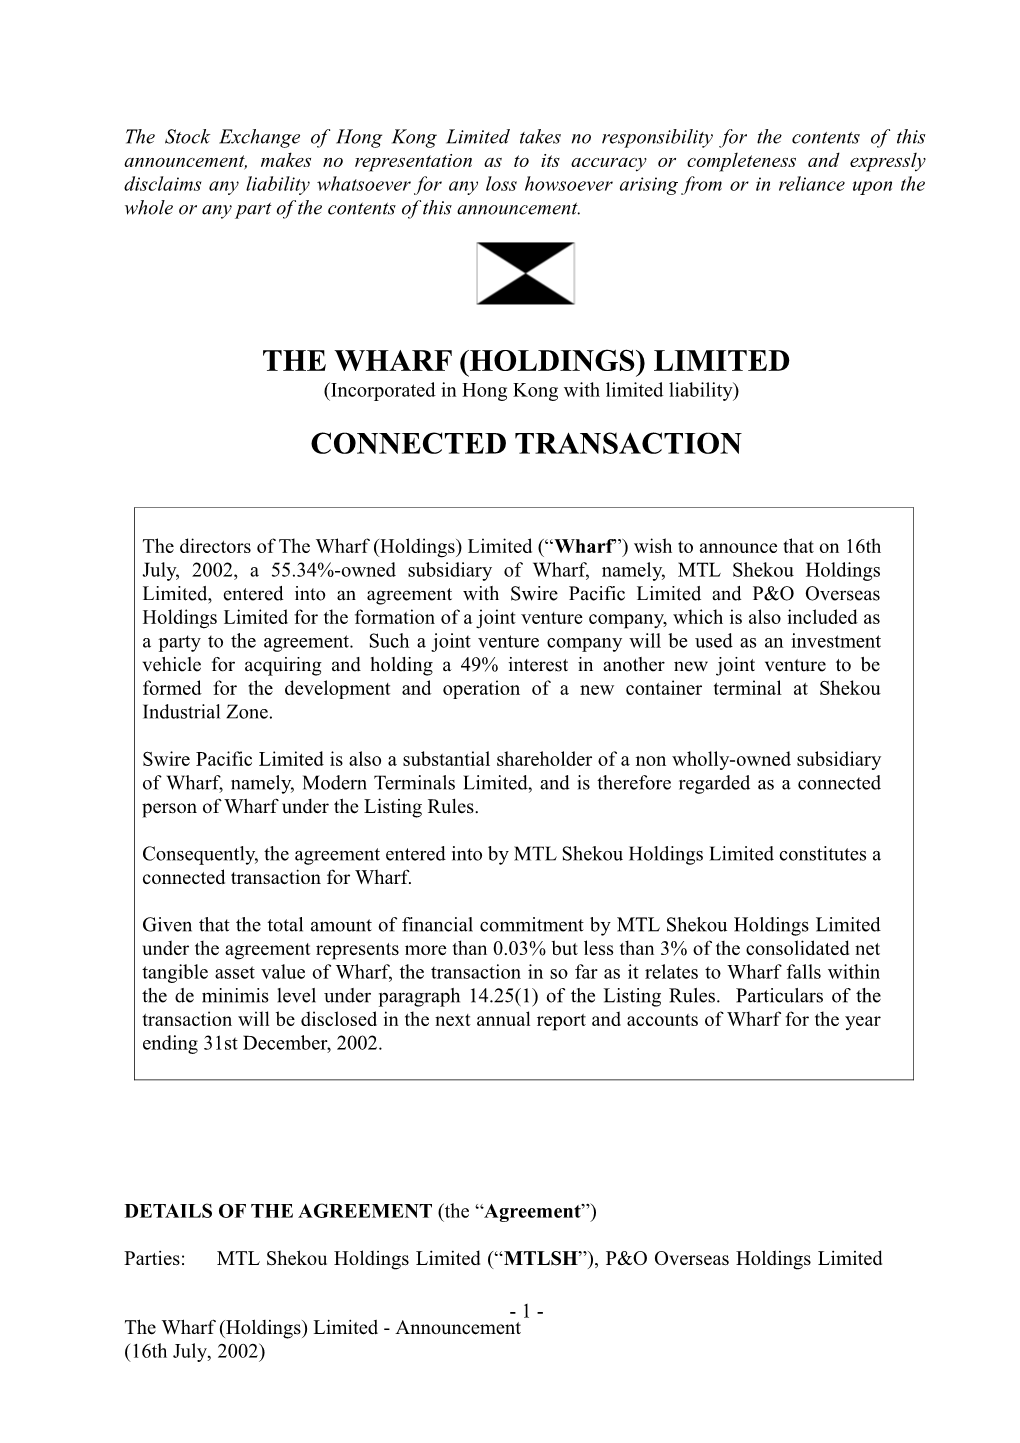 The Wharf (Holdings) Limited